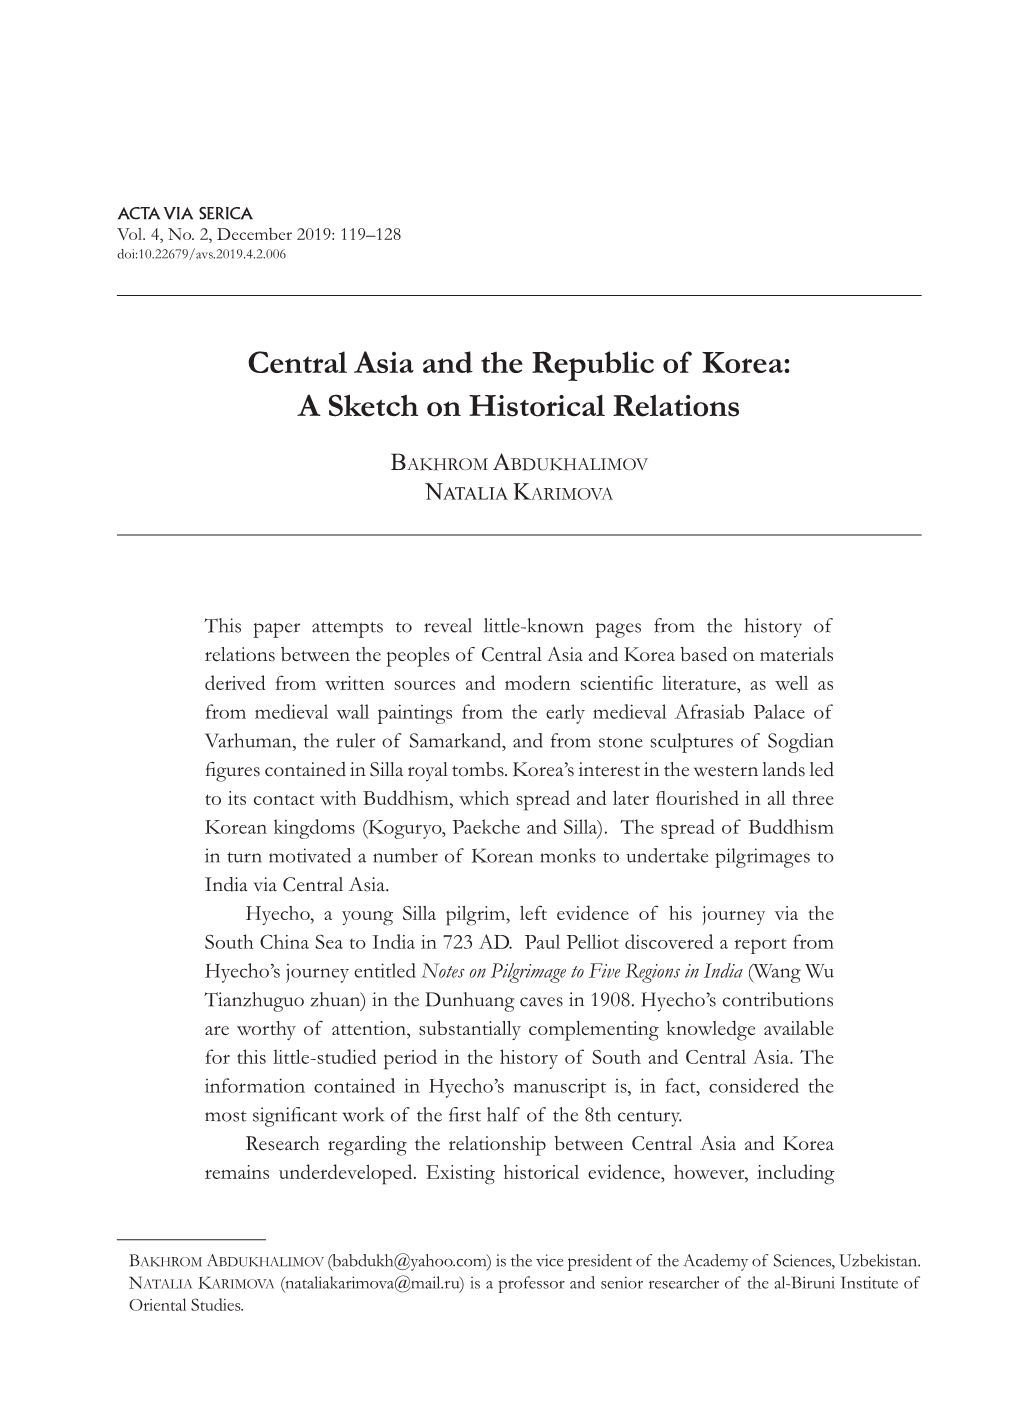 Central Asia and the Republic of Korea: a Sketch on Historical Relations